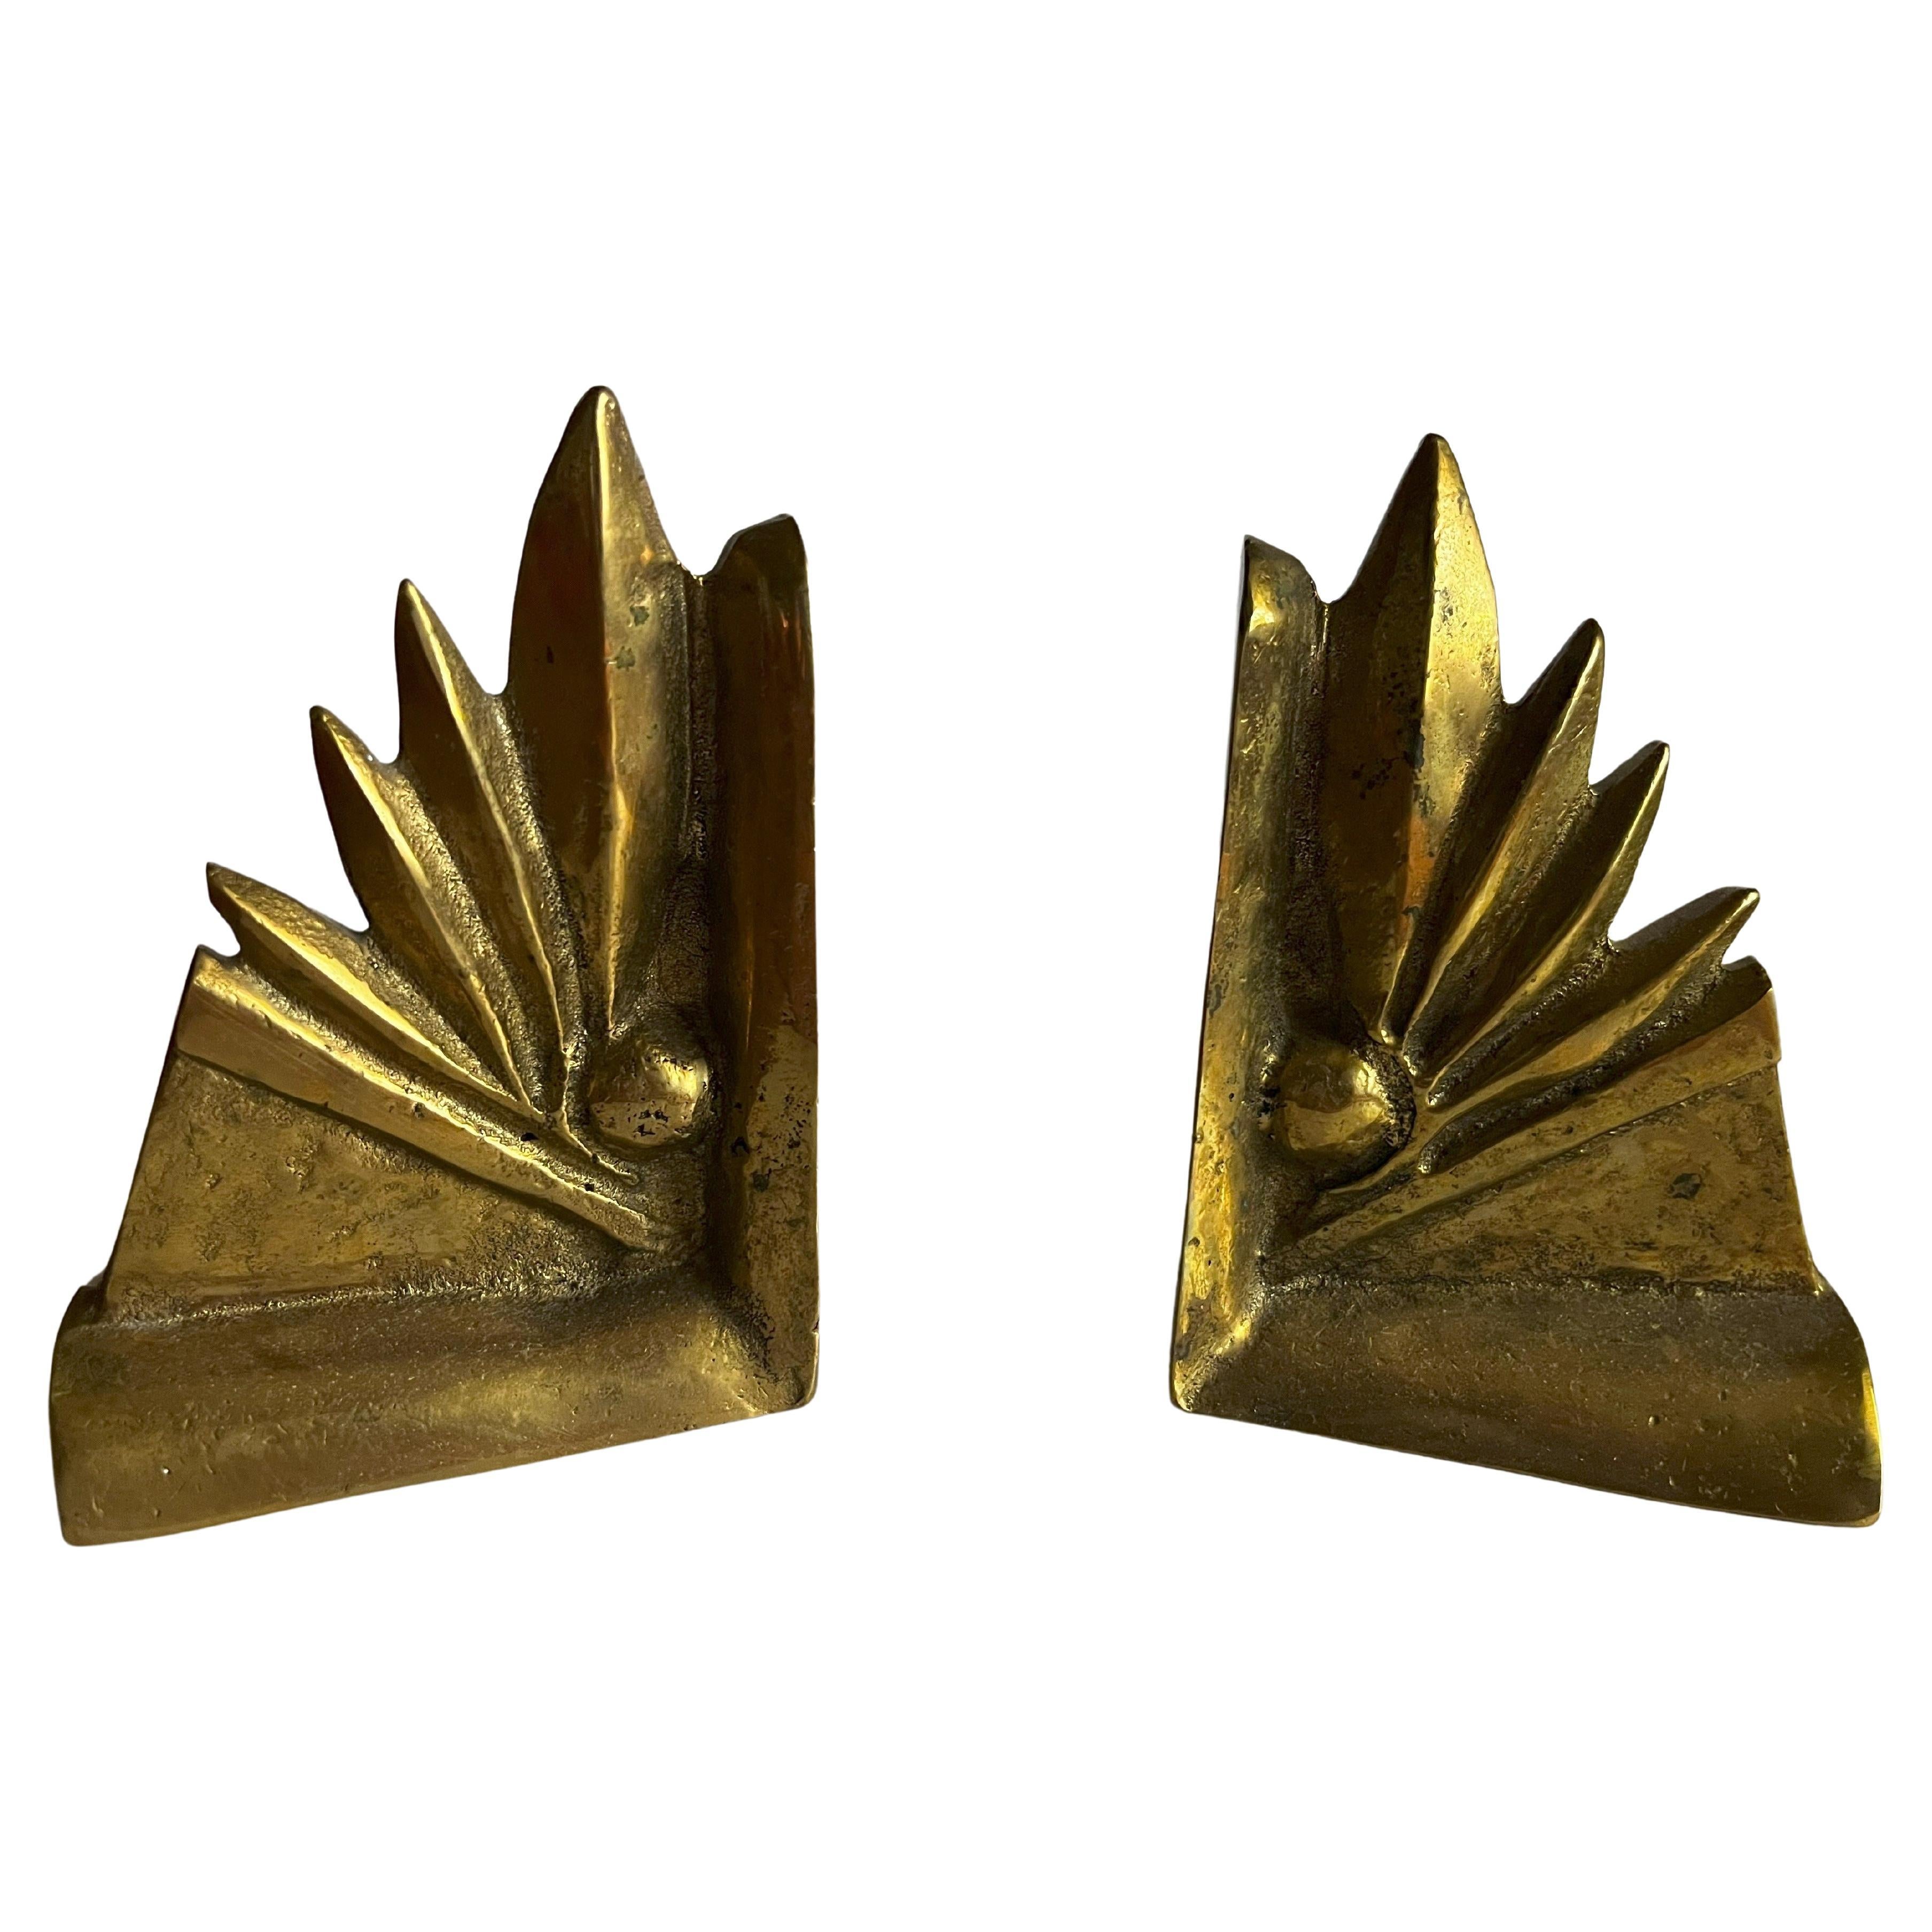 Spectacular bookends, made entirely of brass, from the Art Deco period, around the 1930s, probably made in Austria or Germany.

The bookends of the same size have a wide stand and support and a special representation fans out in between. It is a